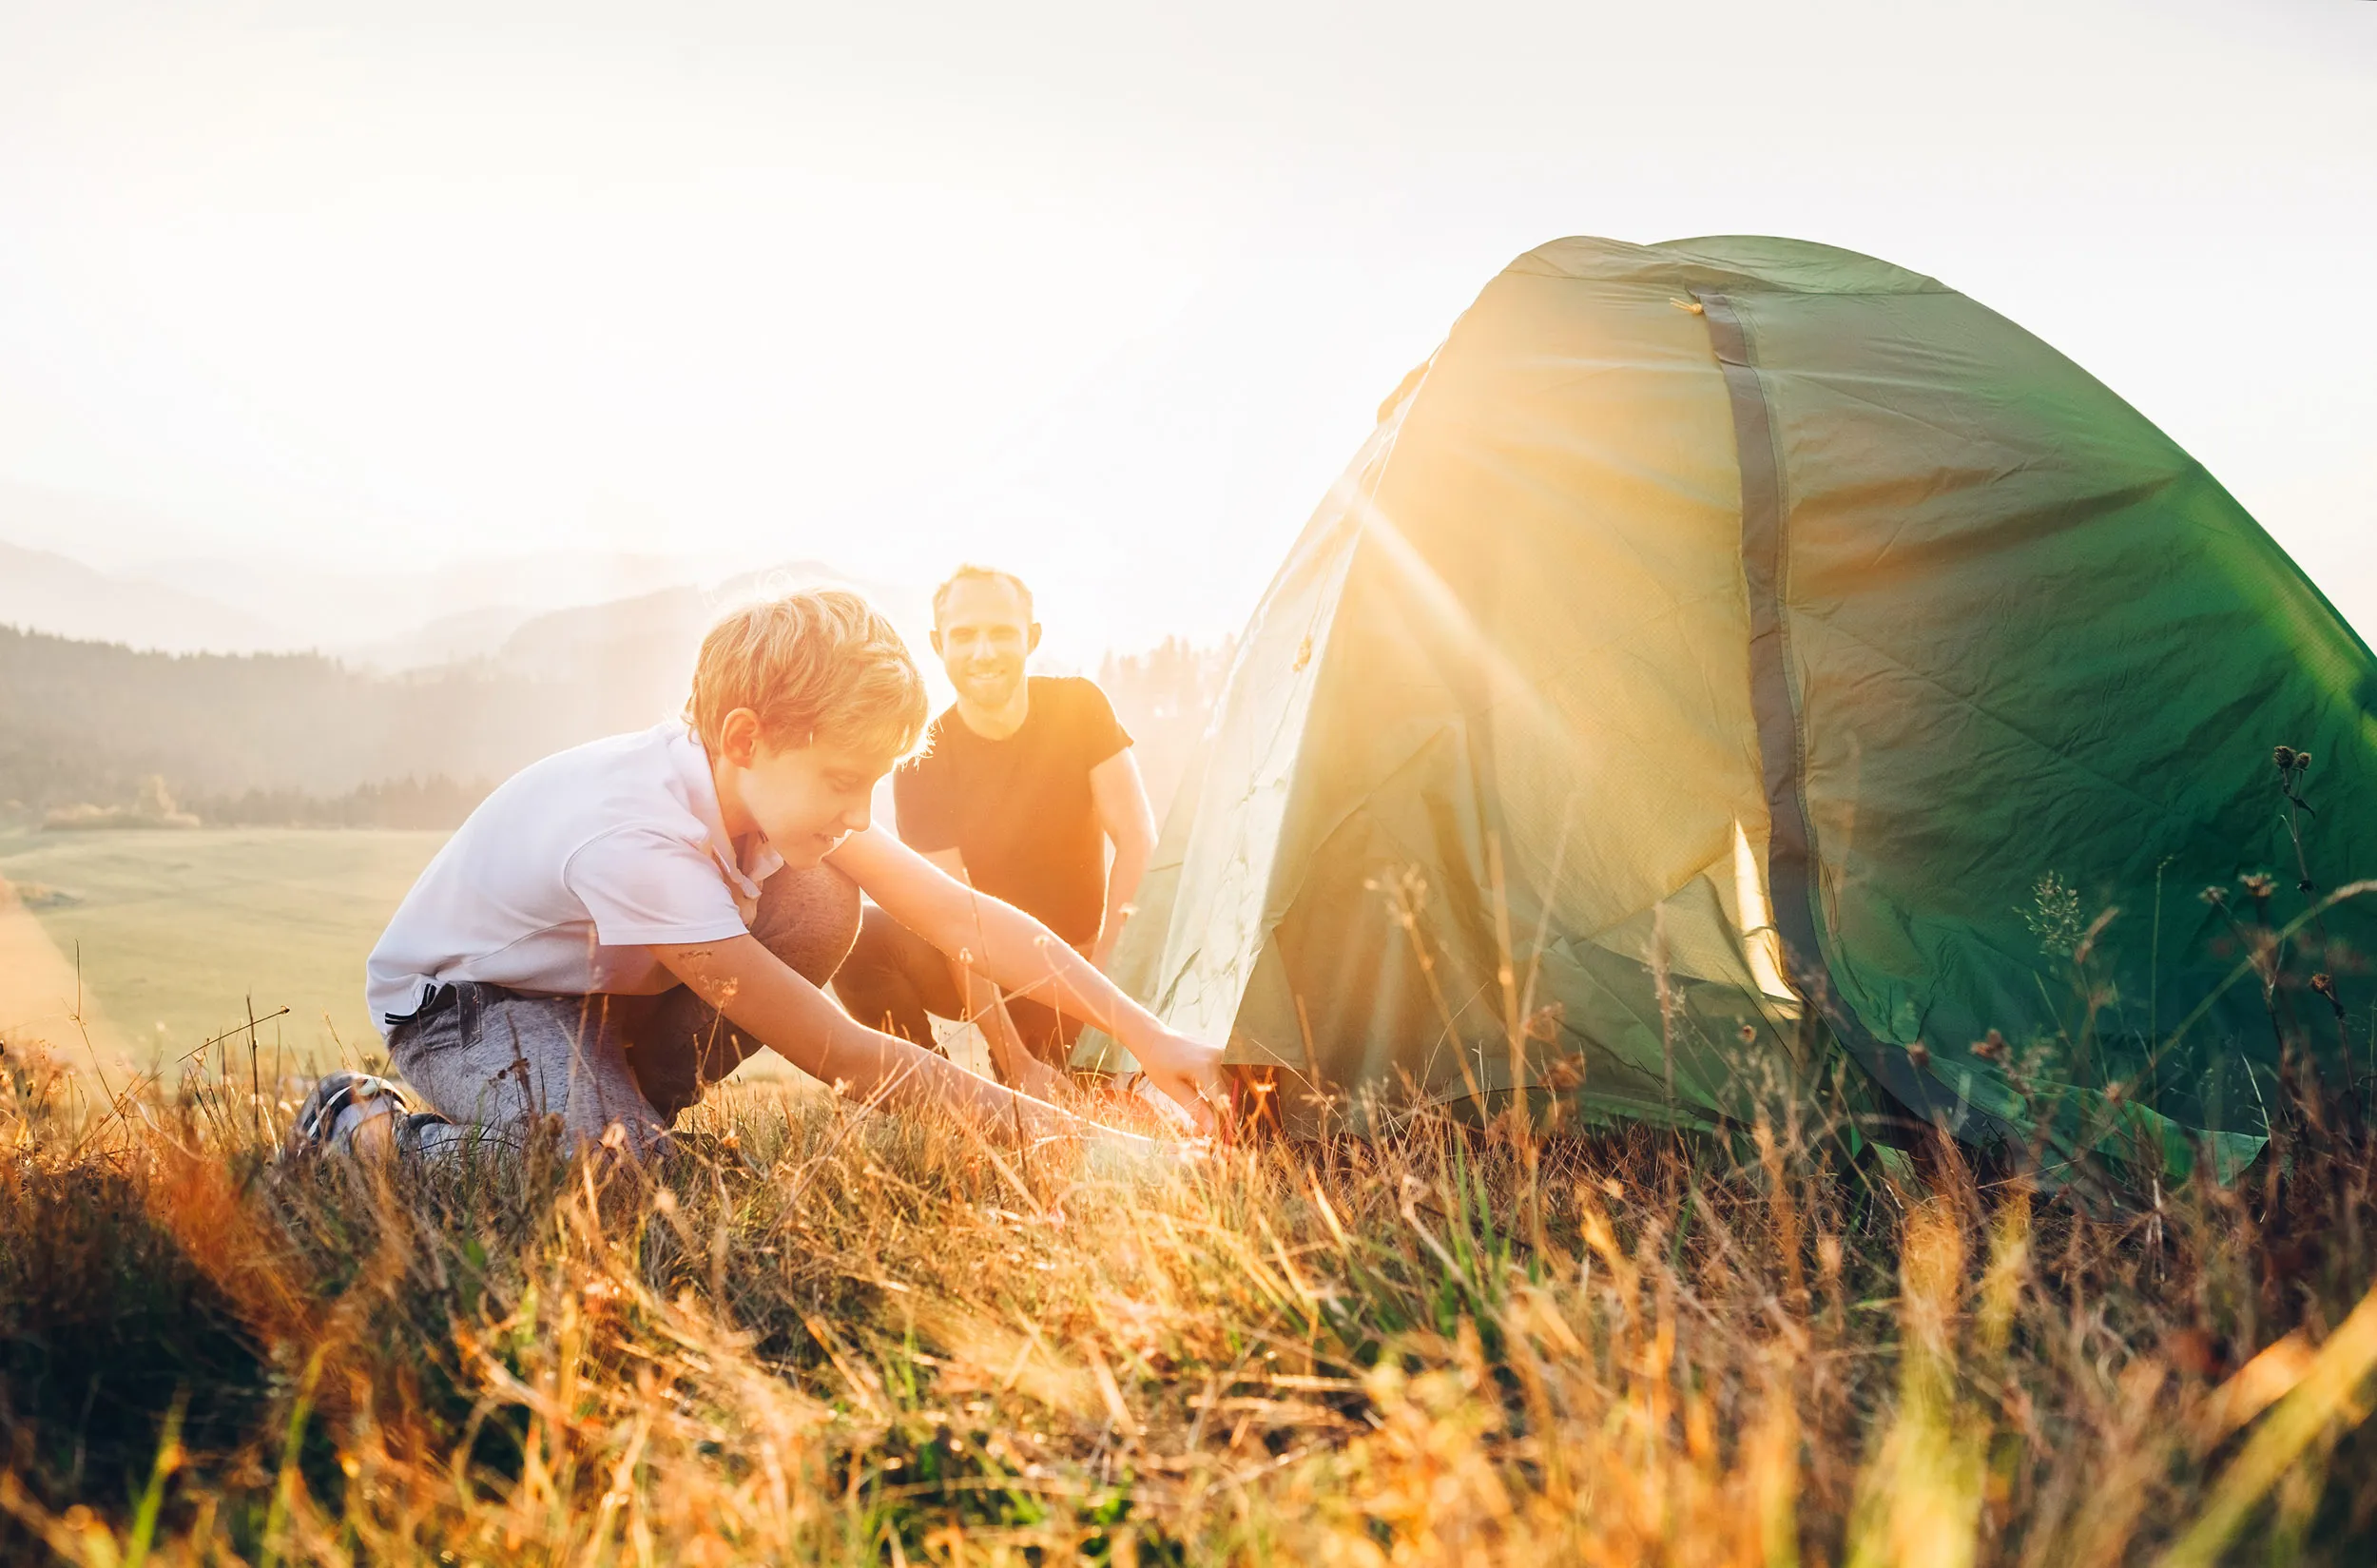 An adult and child setting up a tent on a grassy hill, with the sun sunsetting behind.